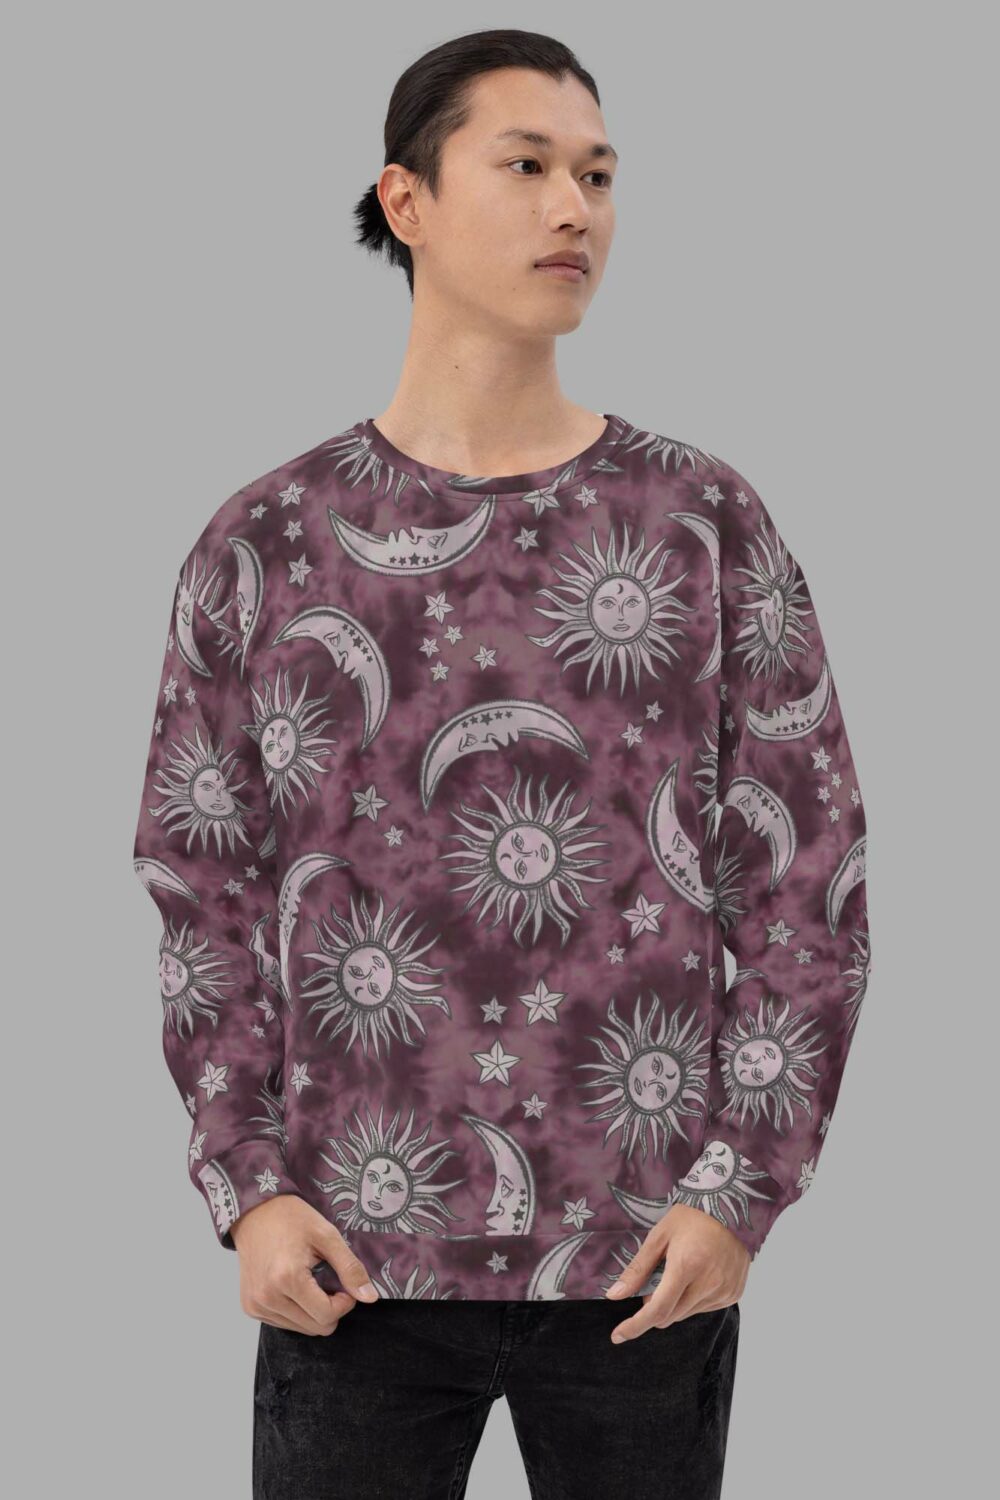 cosmic drifters pink suns moons print sweater front